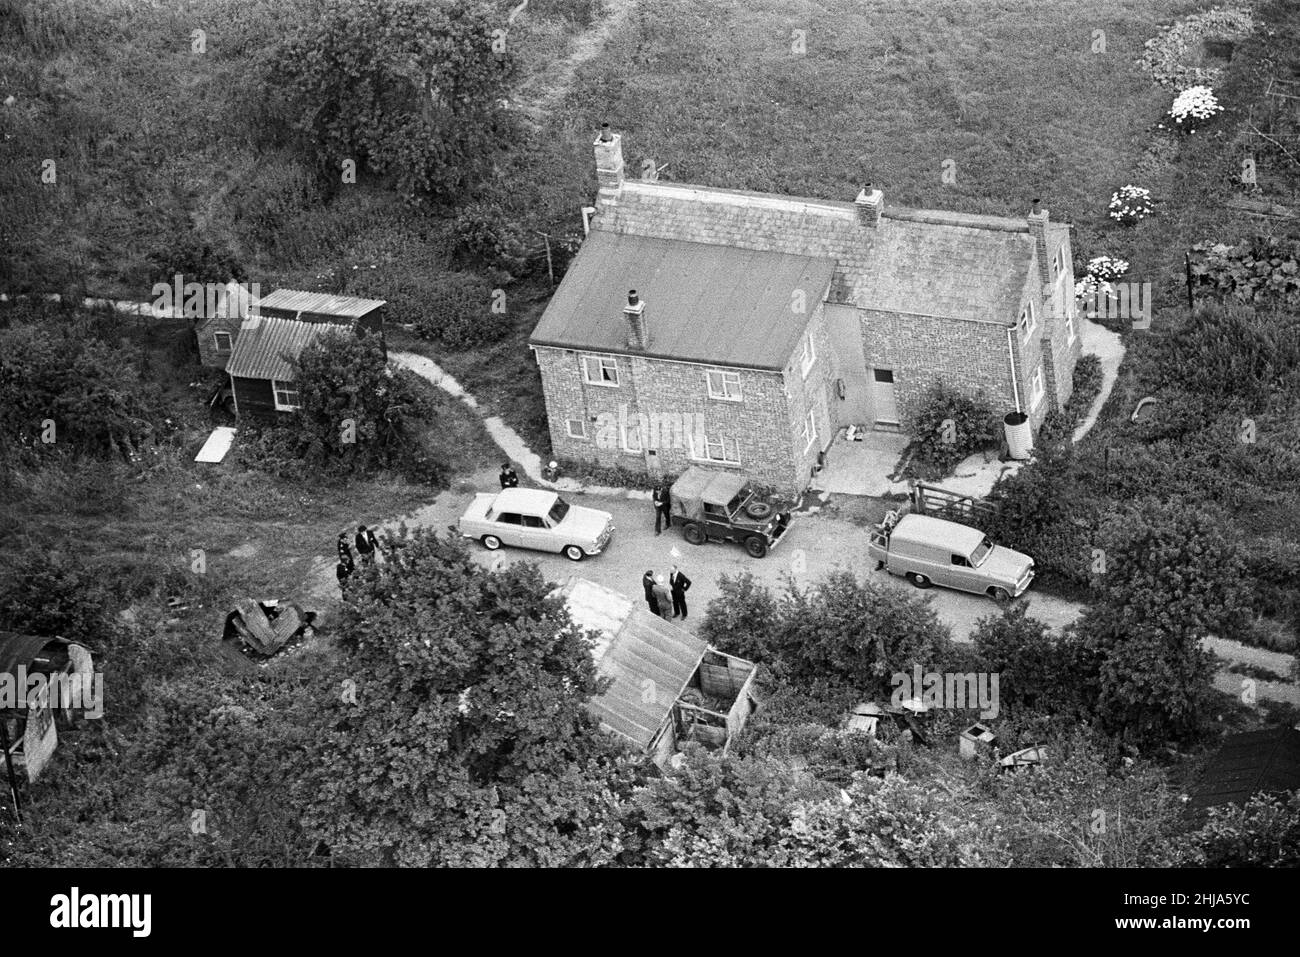 Leatherslade Farm, between Oakley and Brill in Buckinghamshire, hideout used by gang, 27 miles from the crime scene, Tuesday 13th August 1963. Our Picture Shows ... aerial view of remote farmhouse used as hideaway by gang in immediate aftermath of robbery.  The 1963 Great Train Robbery was the robbery of 2.6 million pounds from a Royal Mail train heading from Glasgow to London on the West Coast Main Line in the early hours of 8th August 1963, at Bridego Railway Bridge, Ledburn, near Mentmore in  Buckinghamshire, England. Stock Photo